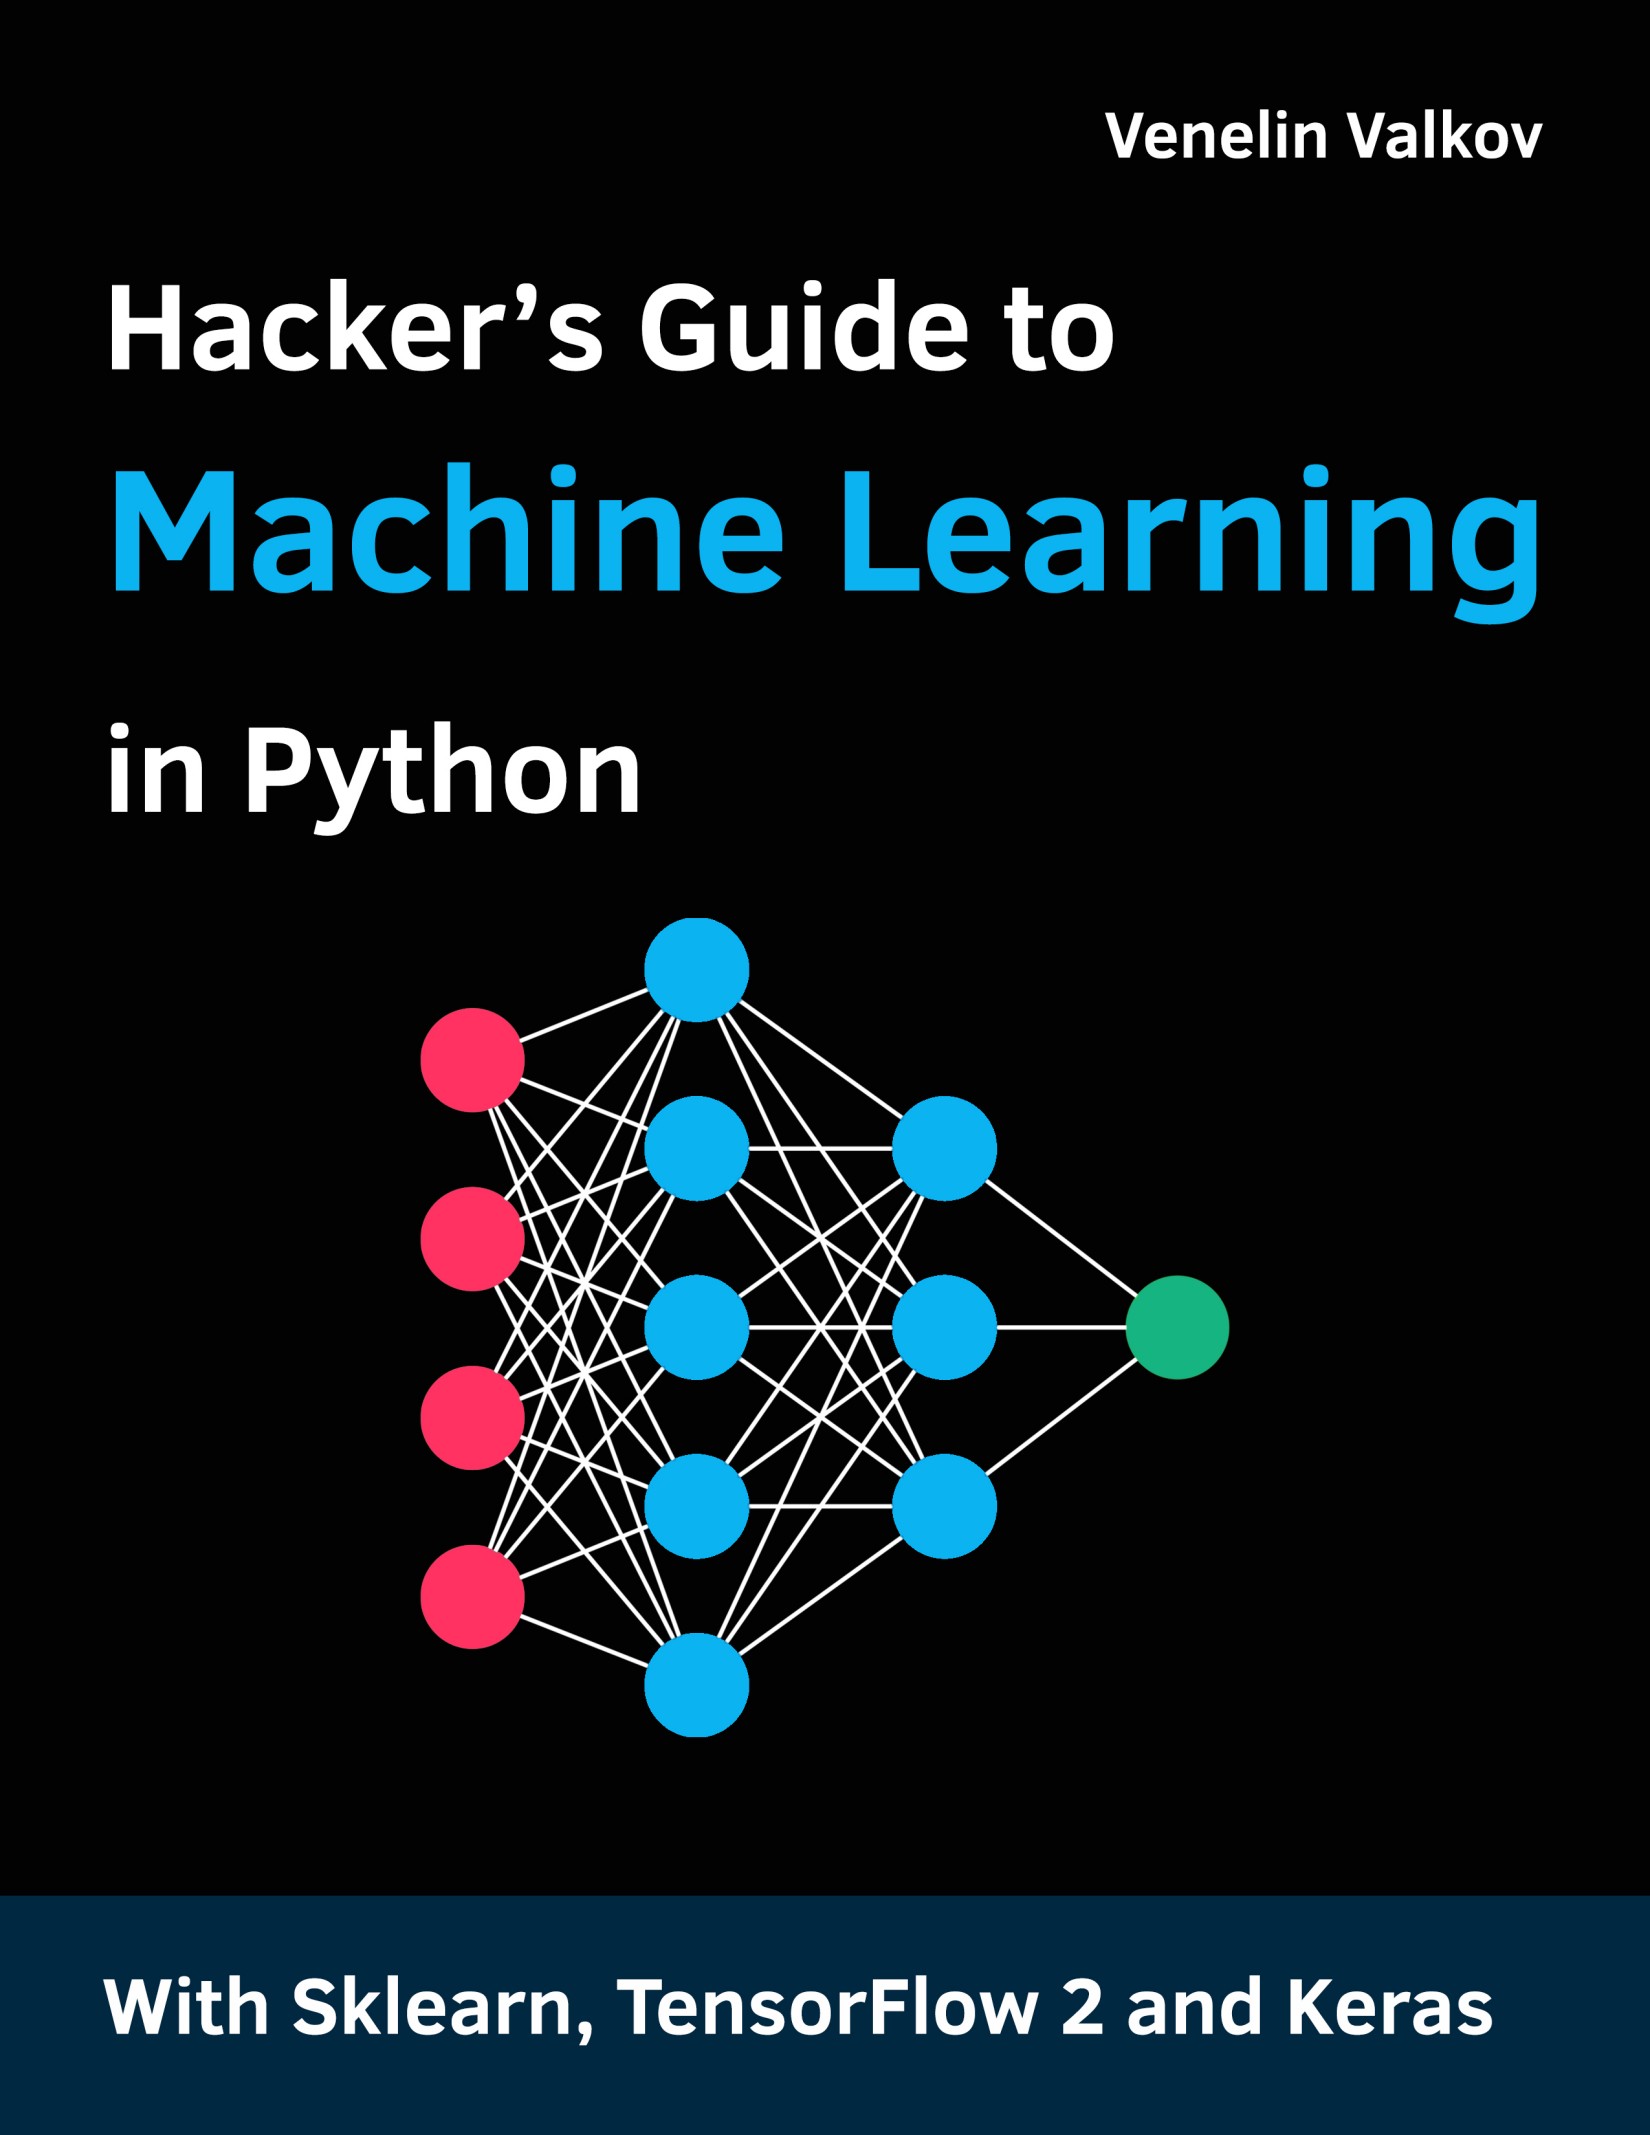 Hacker’s Guide to Machine Learning with Python